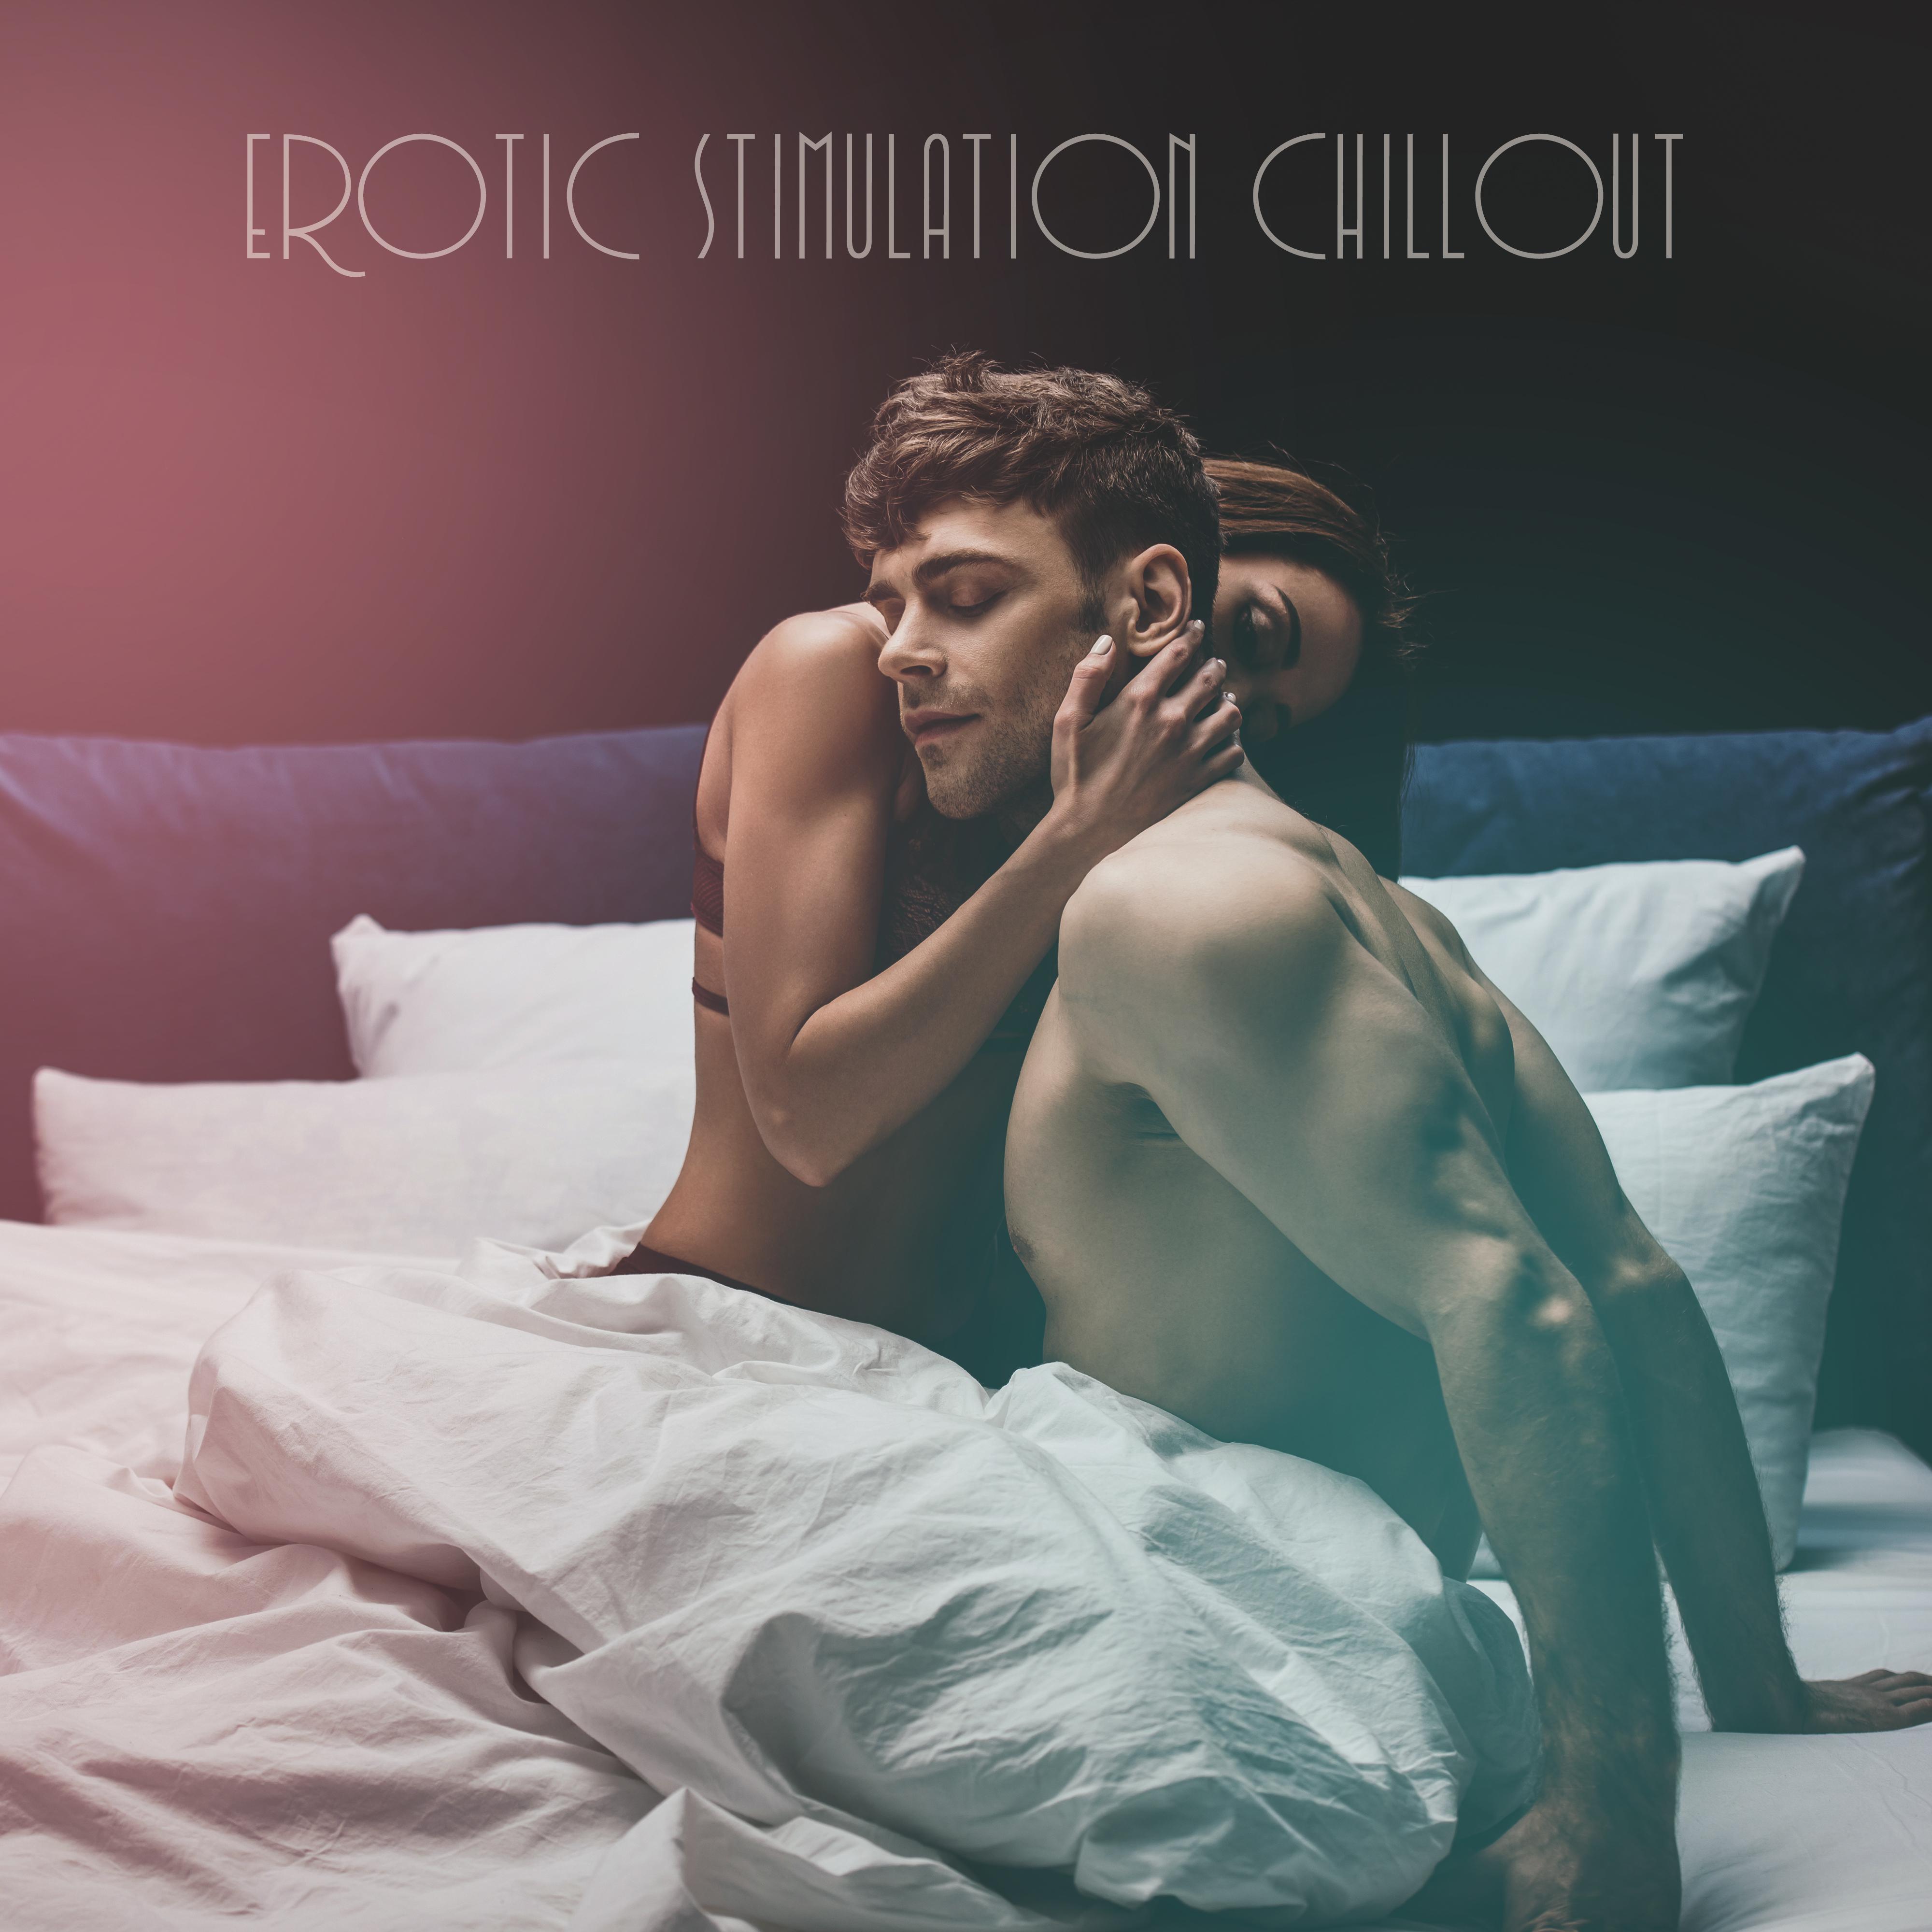 Erotic Stimulation Chillout: 15 Deep Sexual Electronic Beats for Sensual Massage & Tantric Sex